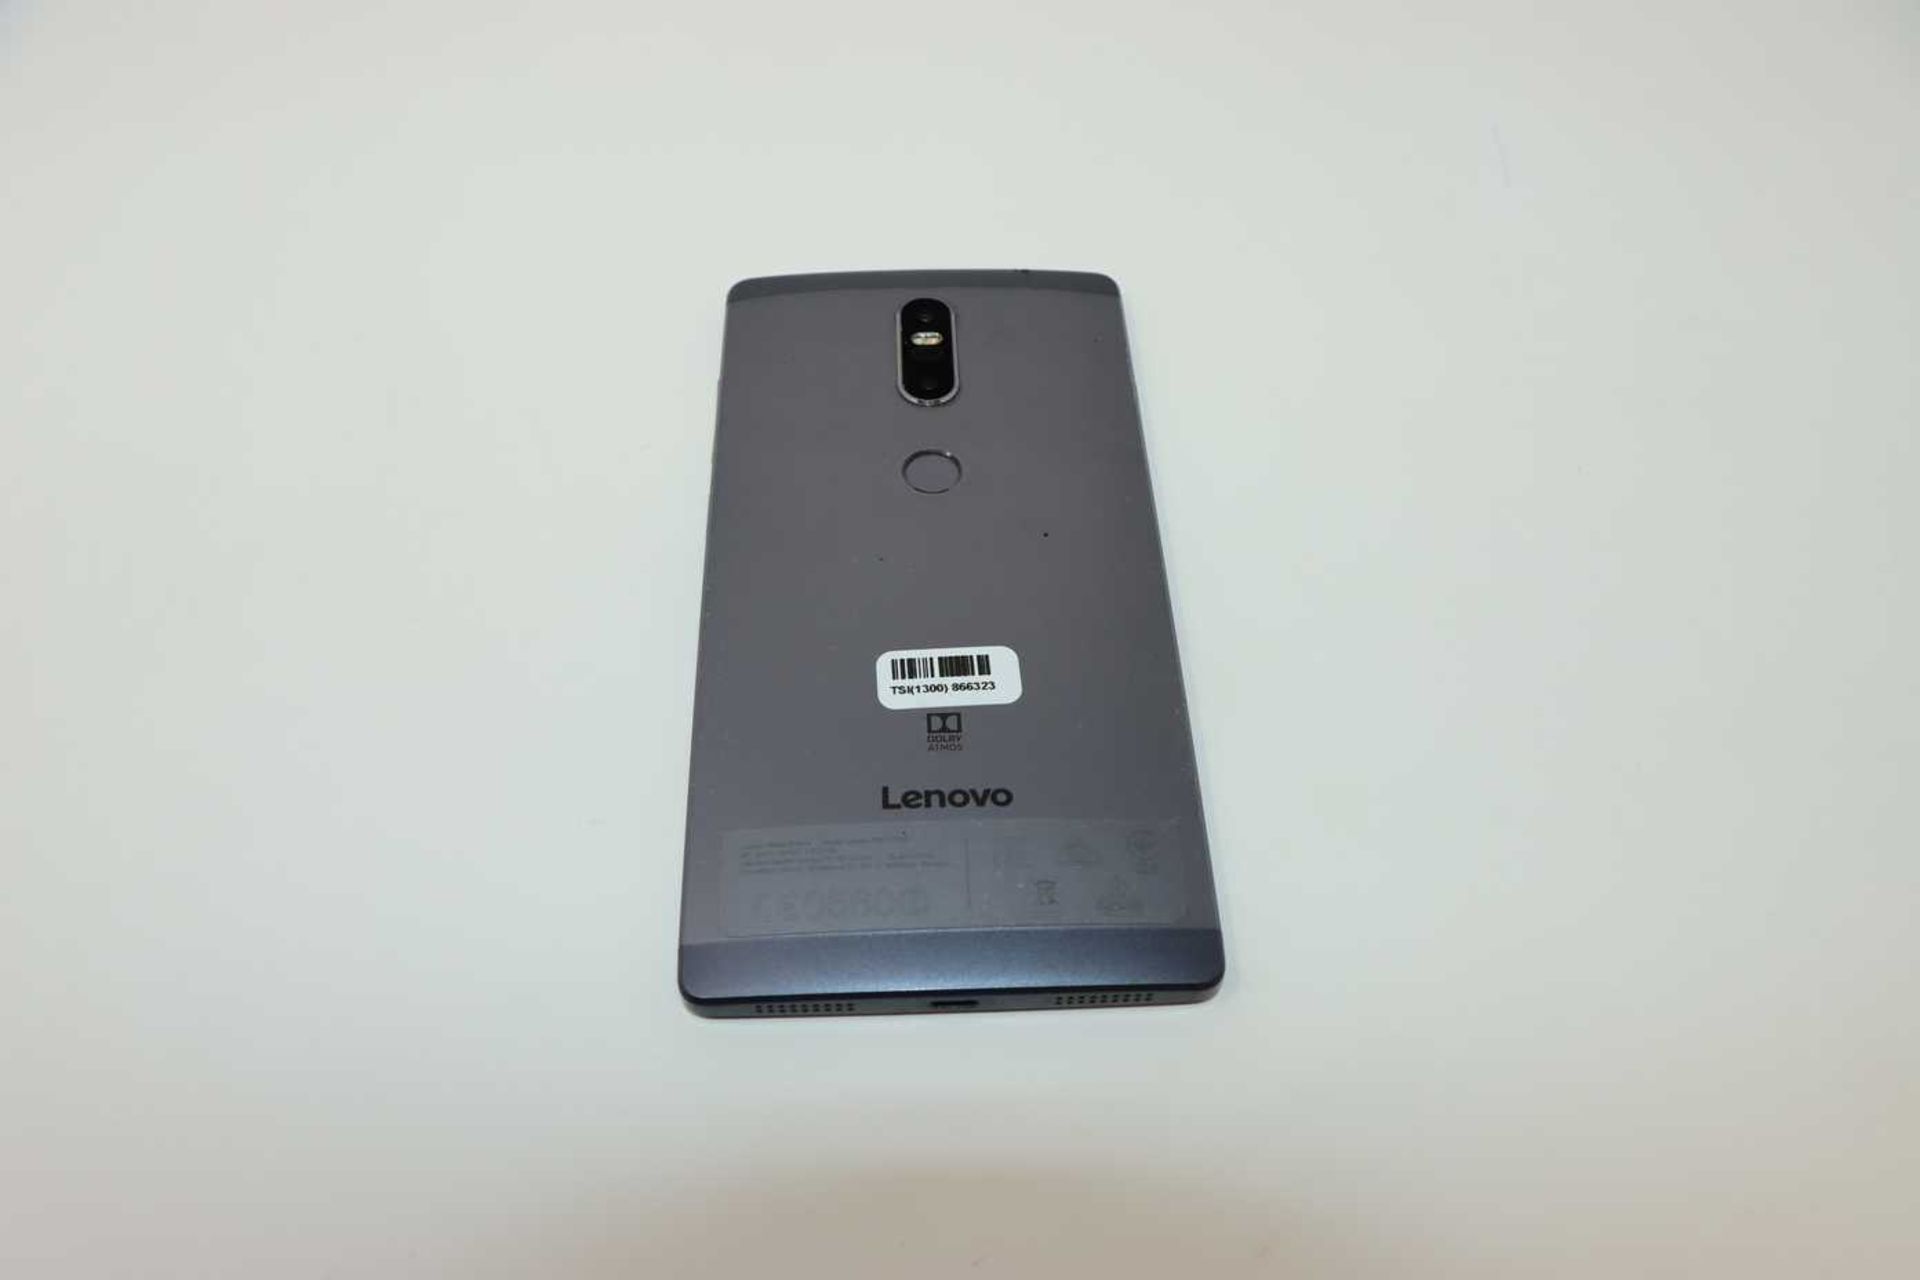 A pre-owned Lenovo PHAB 2 PLUS 32GB 6.4" Smartphone in Gunmetal Grey (Unlocked, Boxed, No Charger - Image 3 of 3